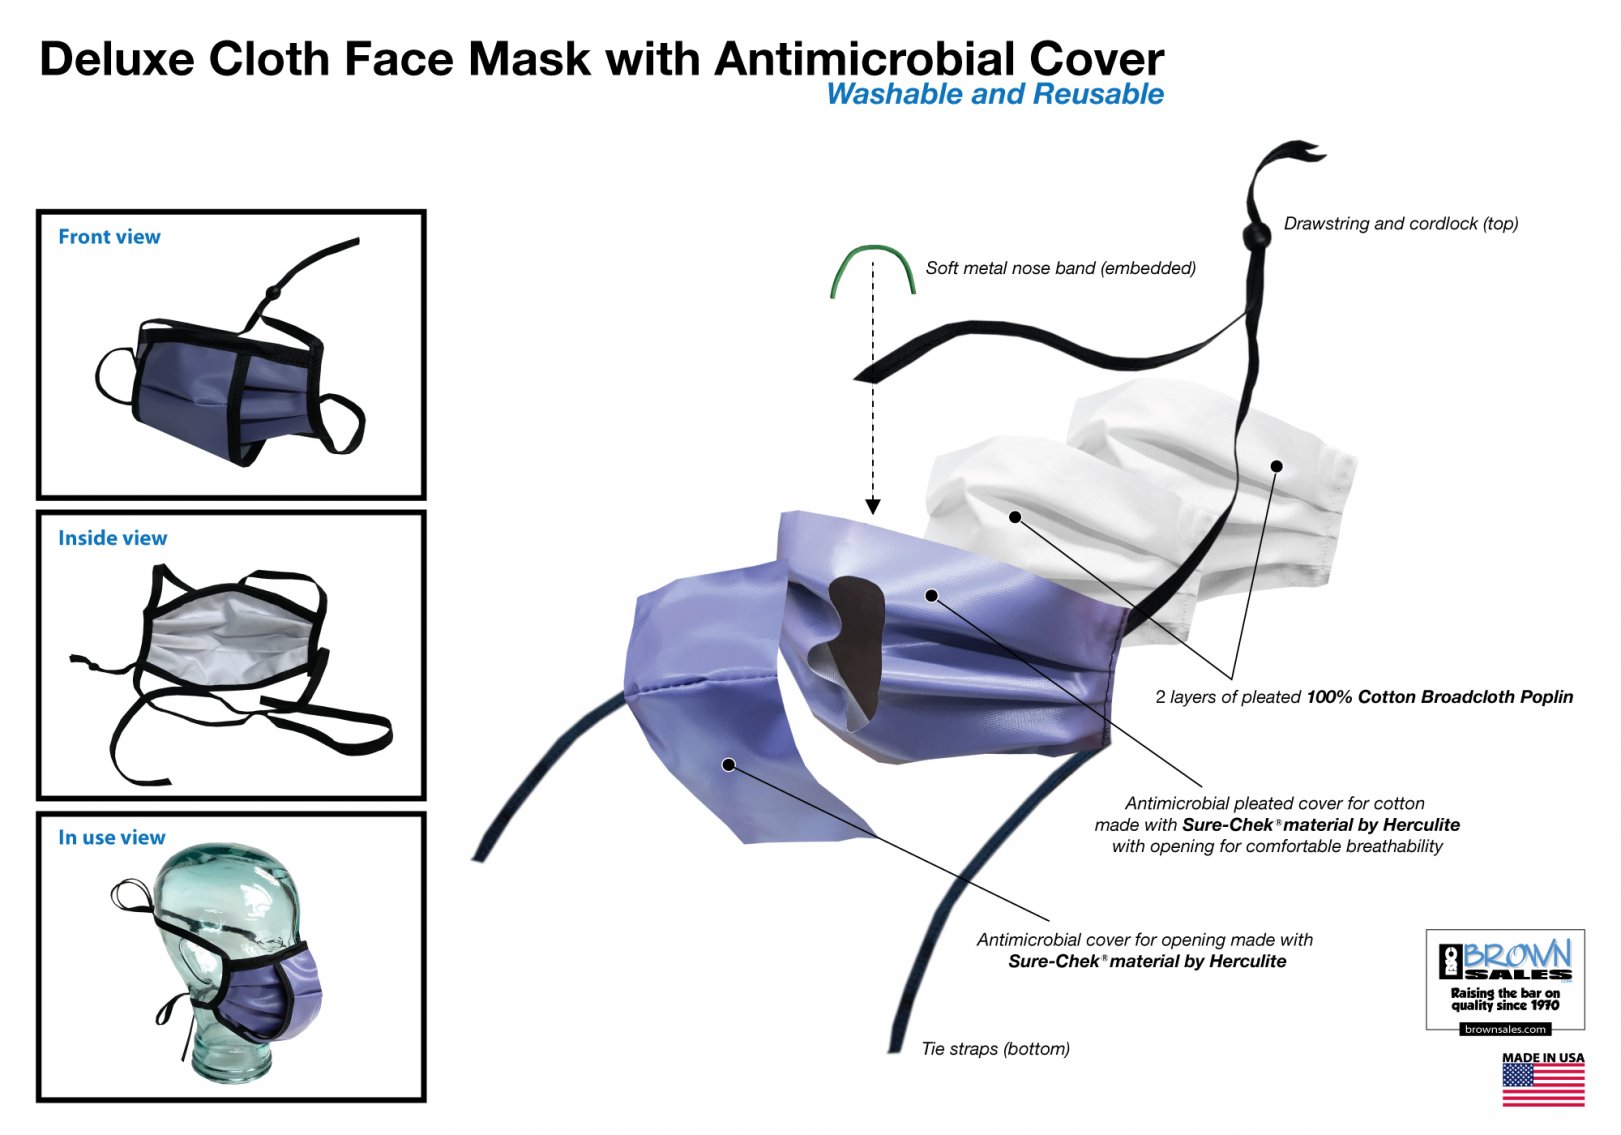 Infographic for Deluxe Cloth Face Mask with Antimicrobial Cover